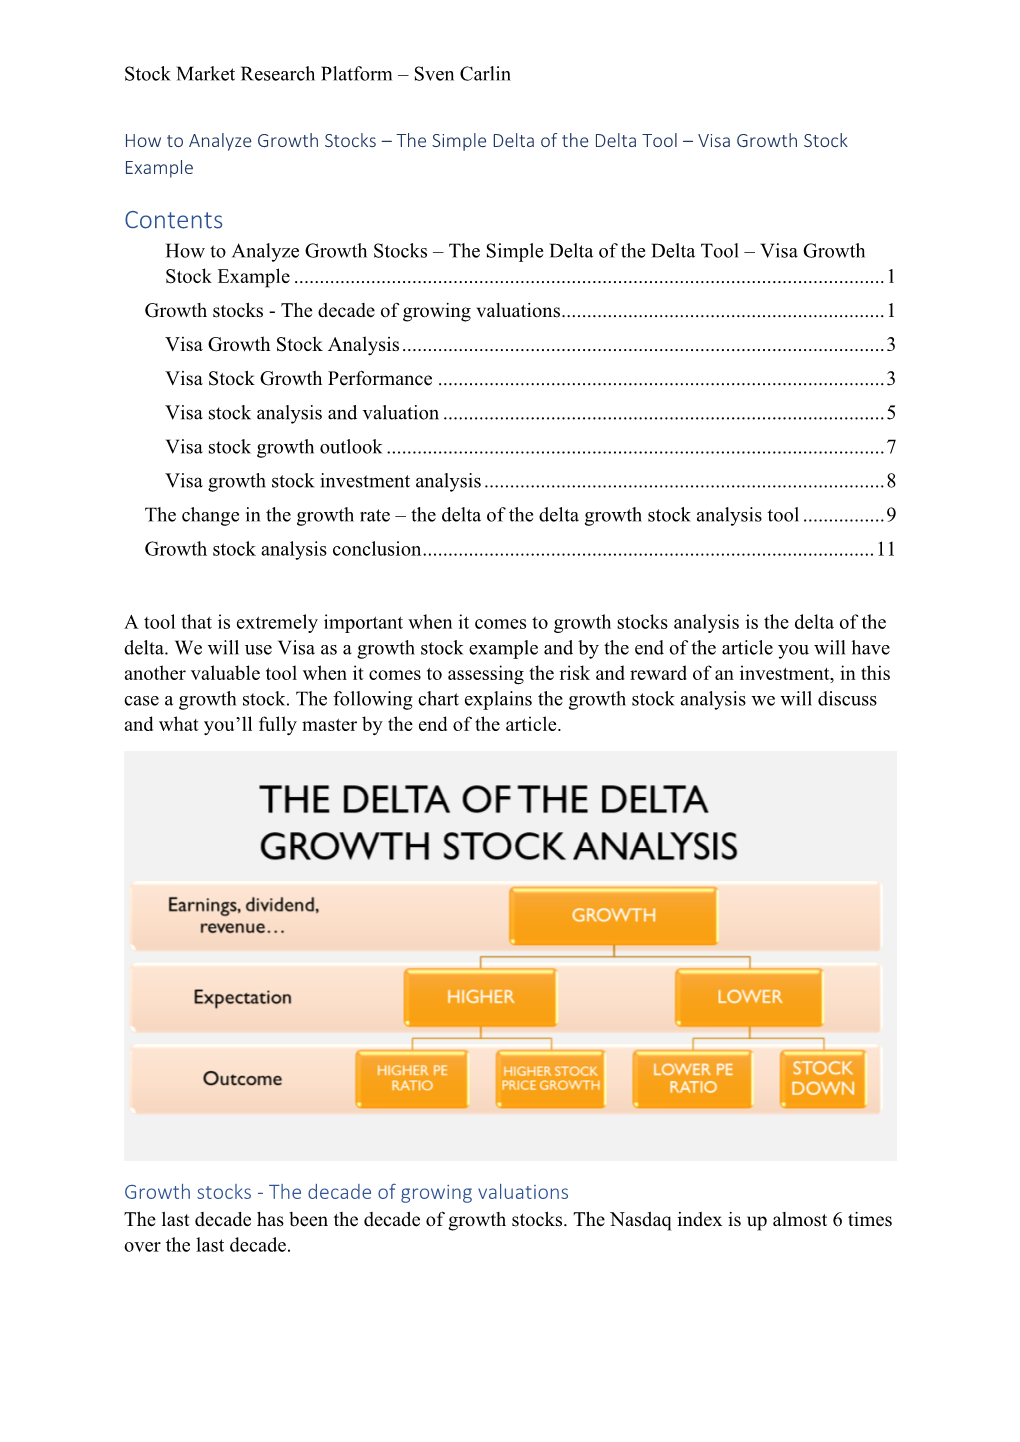 Contents How to Analyze Growth Stocks – the Simple Delta of the Delta Tool – Visa Growth Stock Example